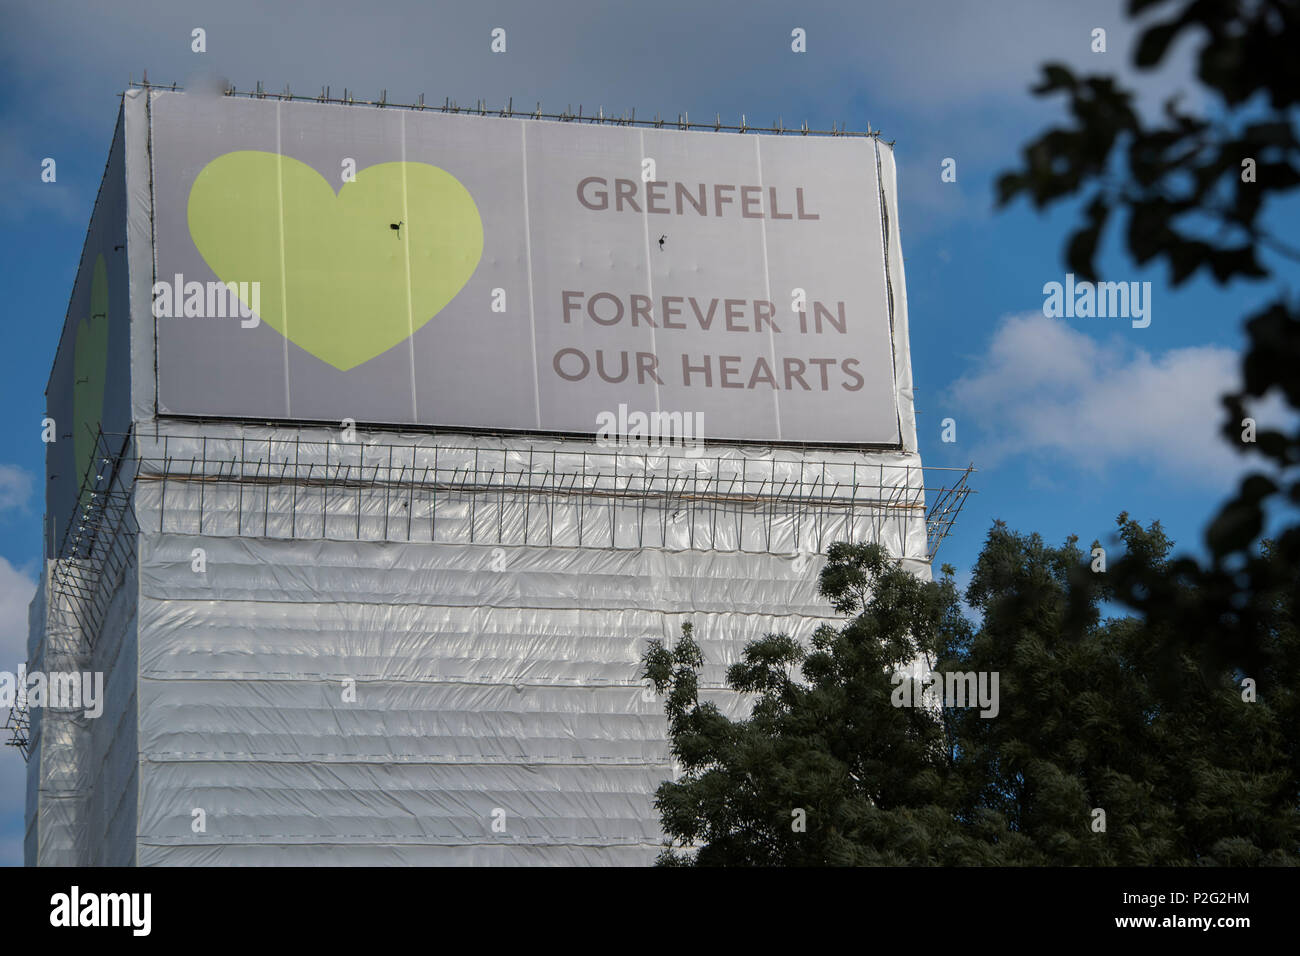 London, UK. 14th June 2018. The cladding on the tower - The first anniversary of the Grenfell Tower Disaster Credit: Guy Bell/Alamy Live News Stock Photo